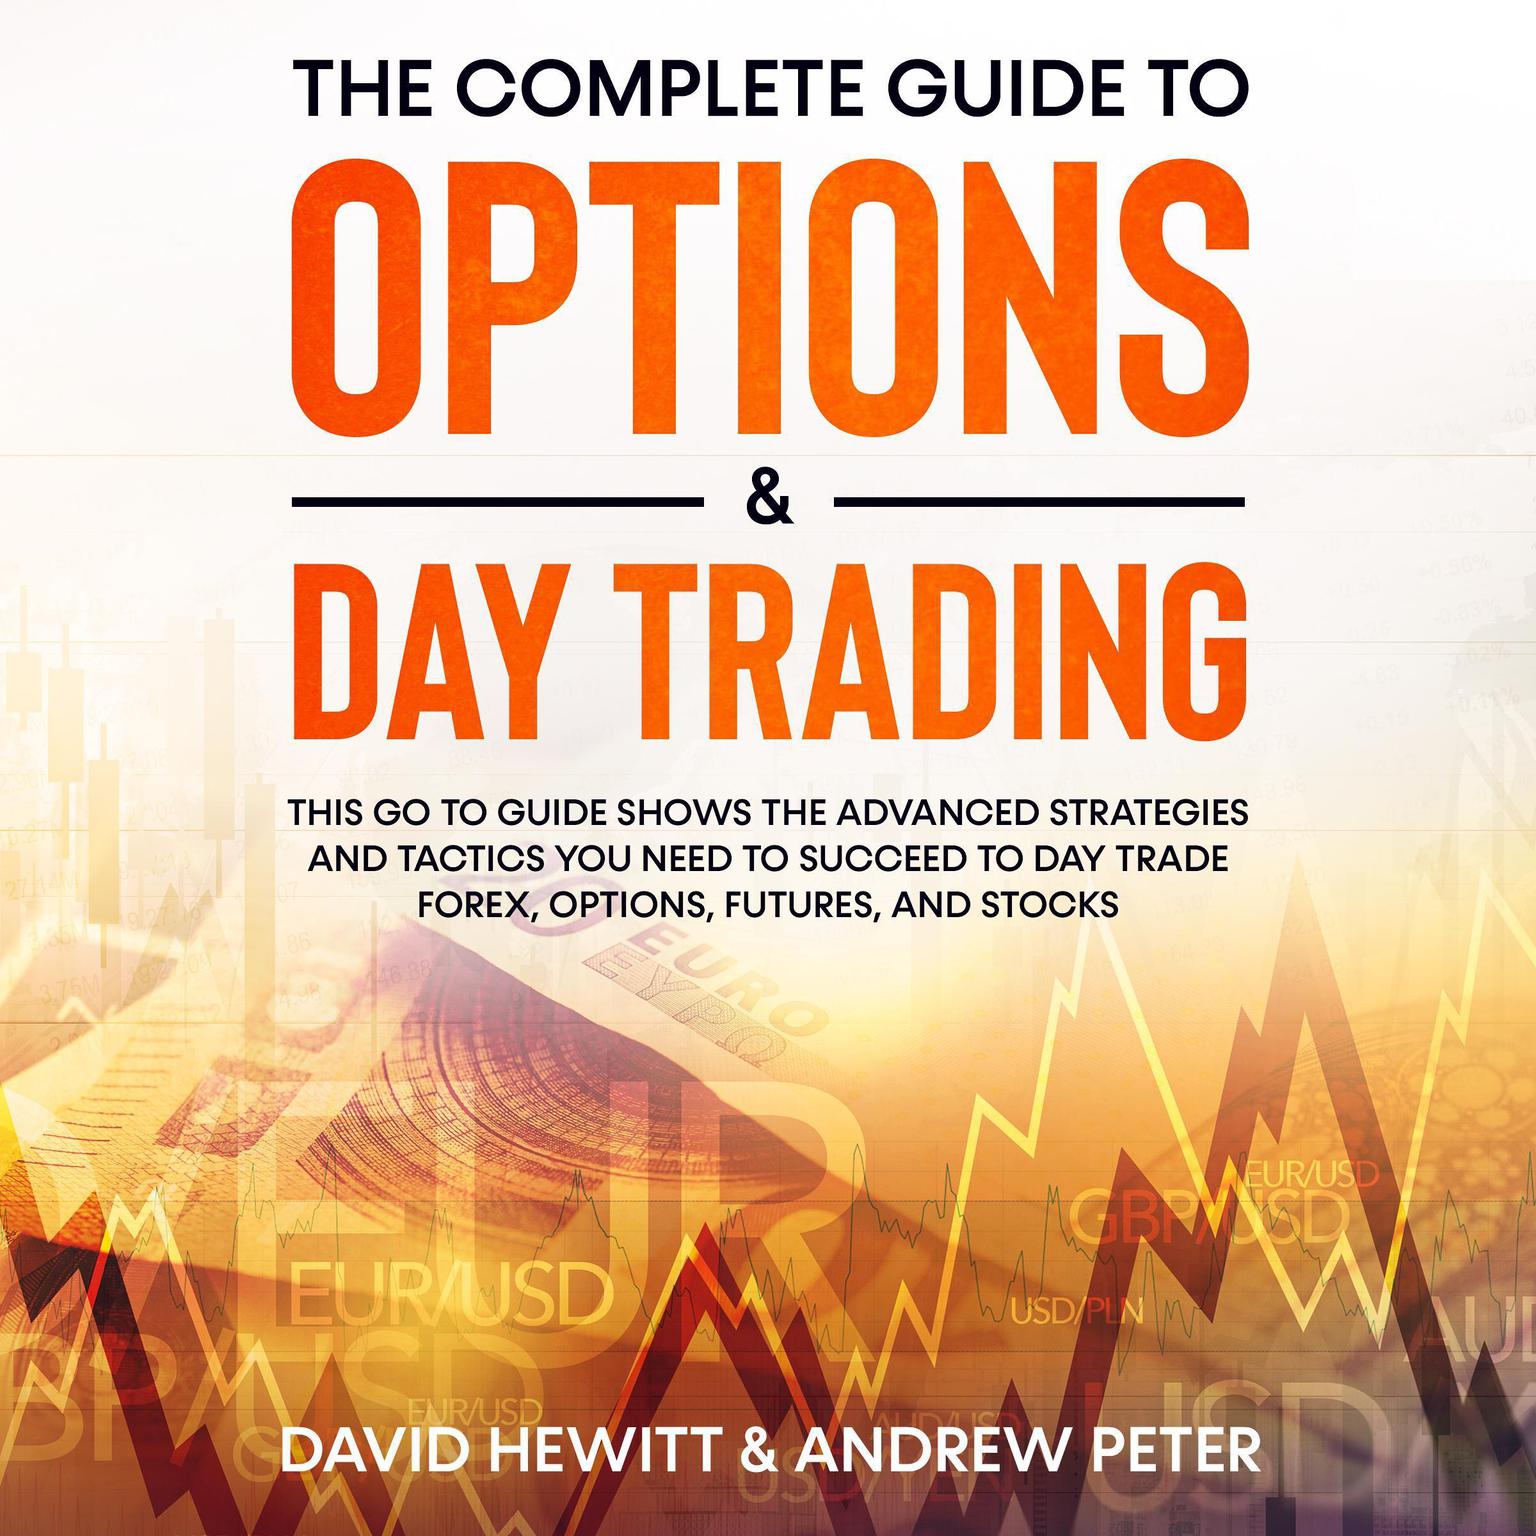 The Complete Guide to Options & Day Trading: This go to guide shows the advanced strategies and tactics you need to succeed to Day Trade Forex, Options, Futures, and Stocks Audiobook, by Andrew Peter